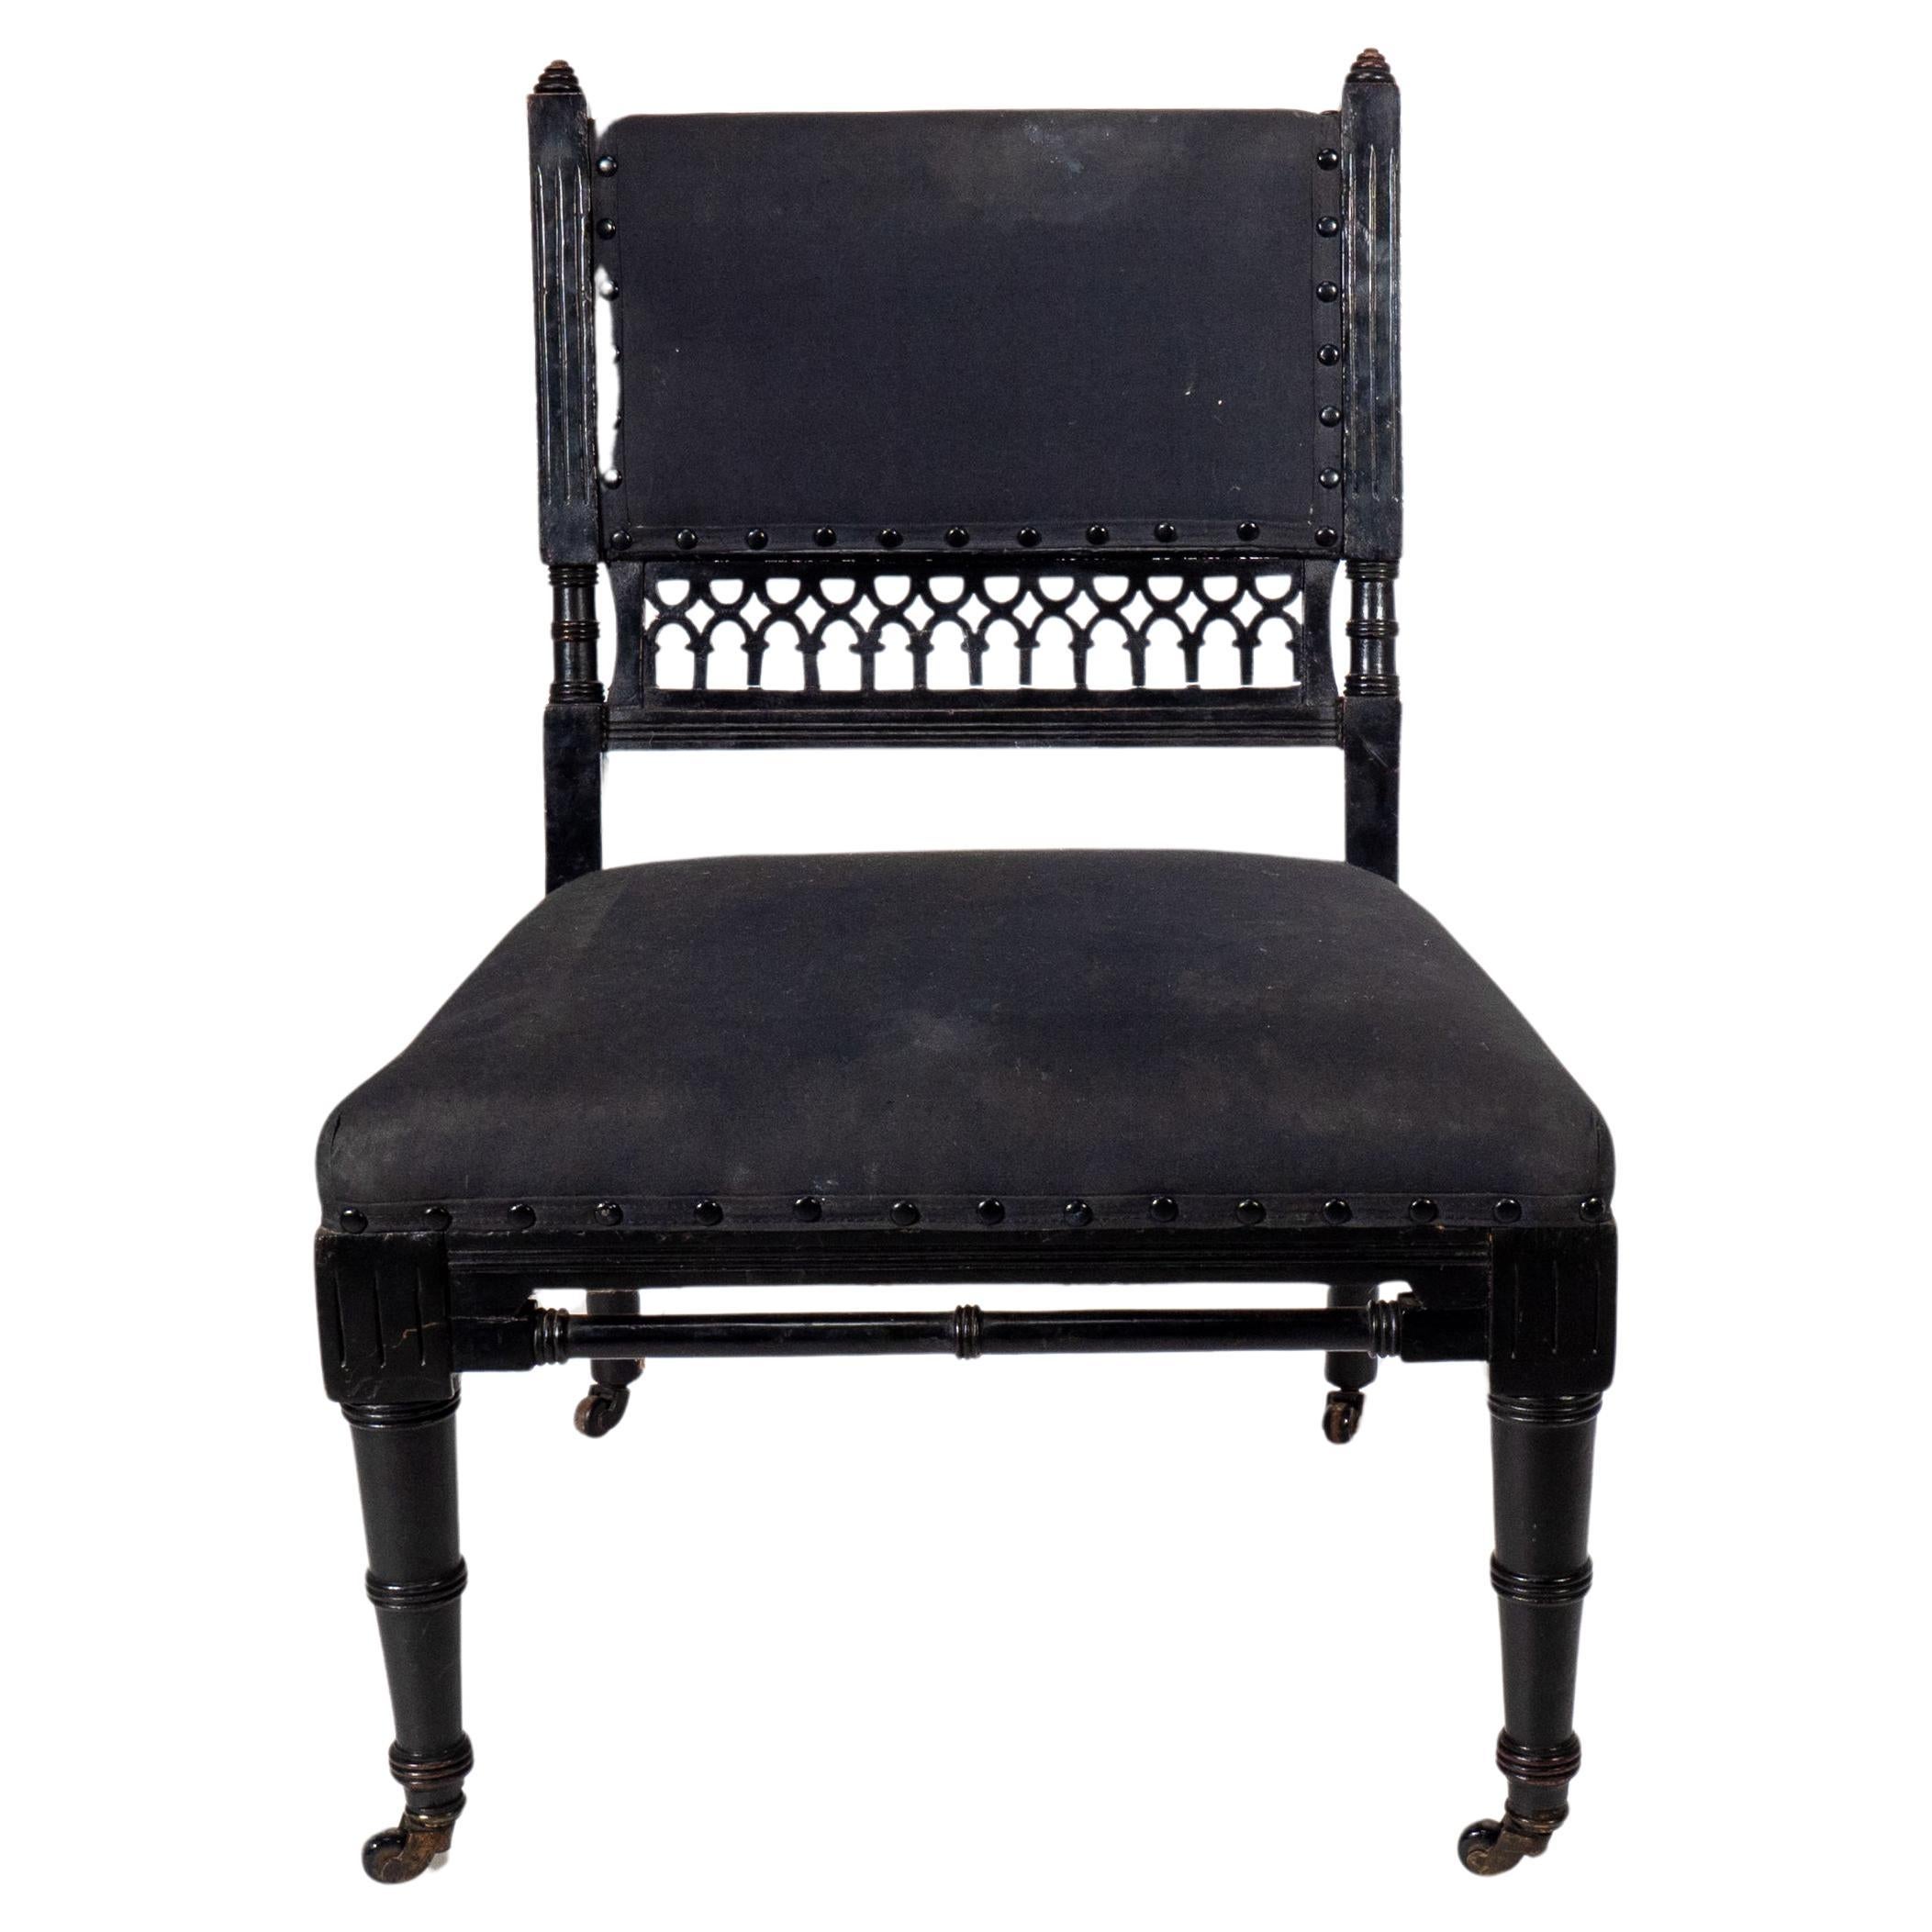 An Aesthetic Movement low side chair with fretwork to the lower back rest